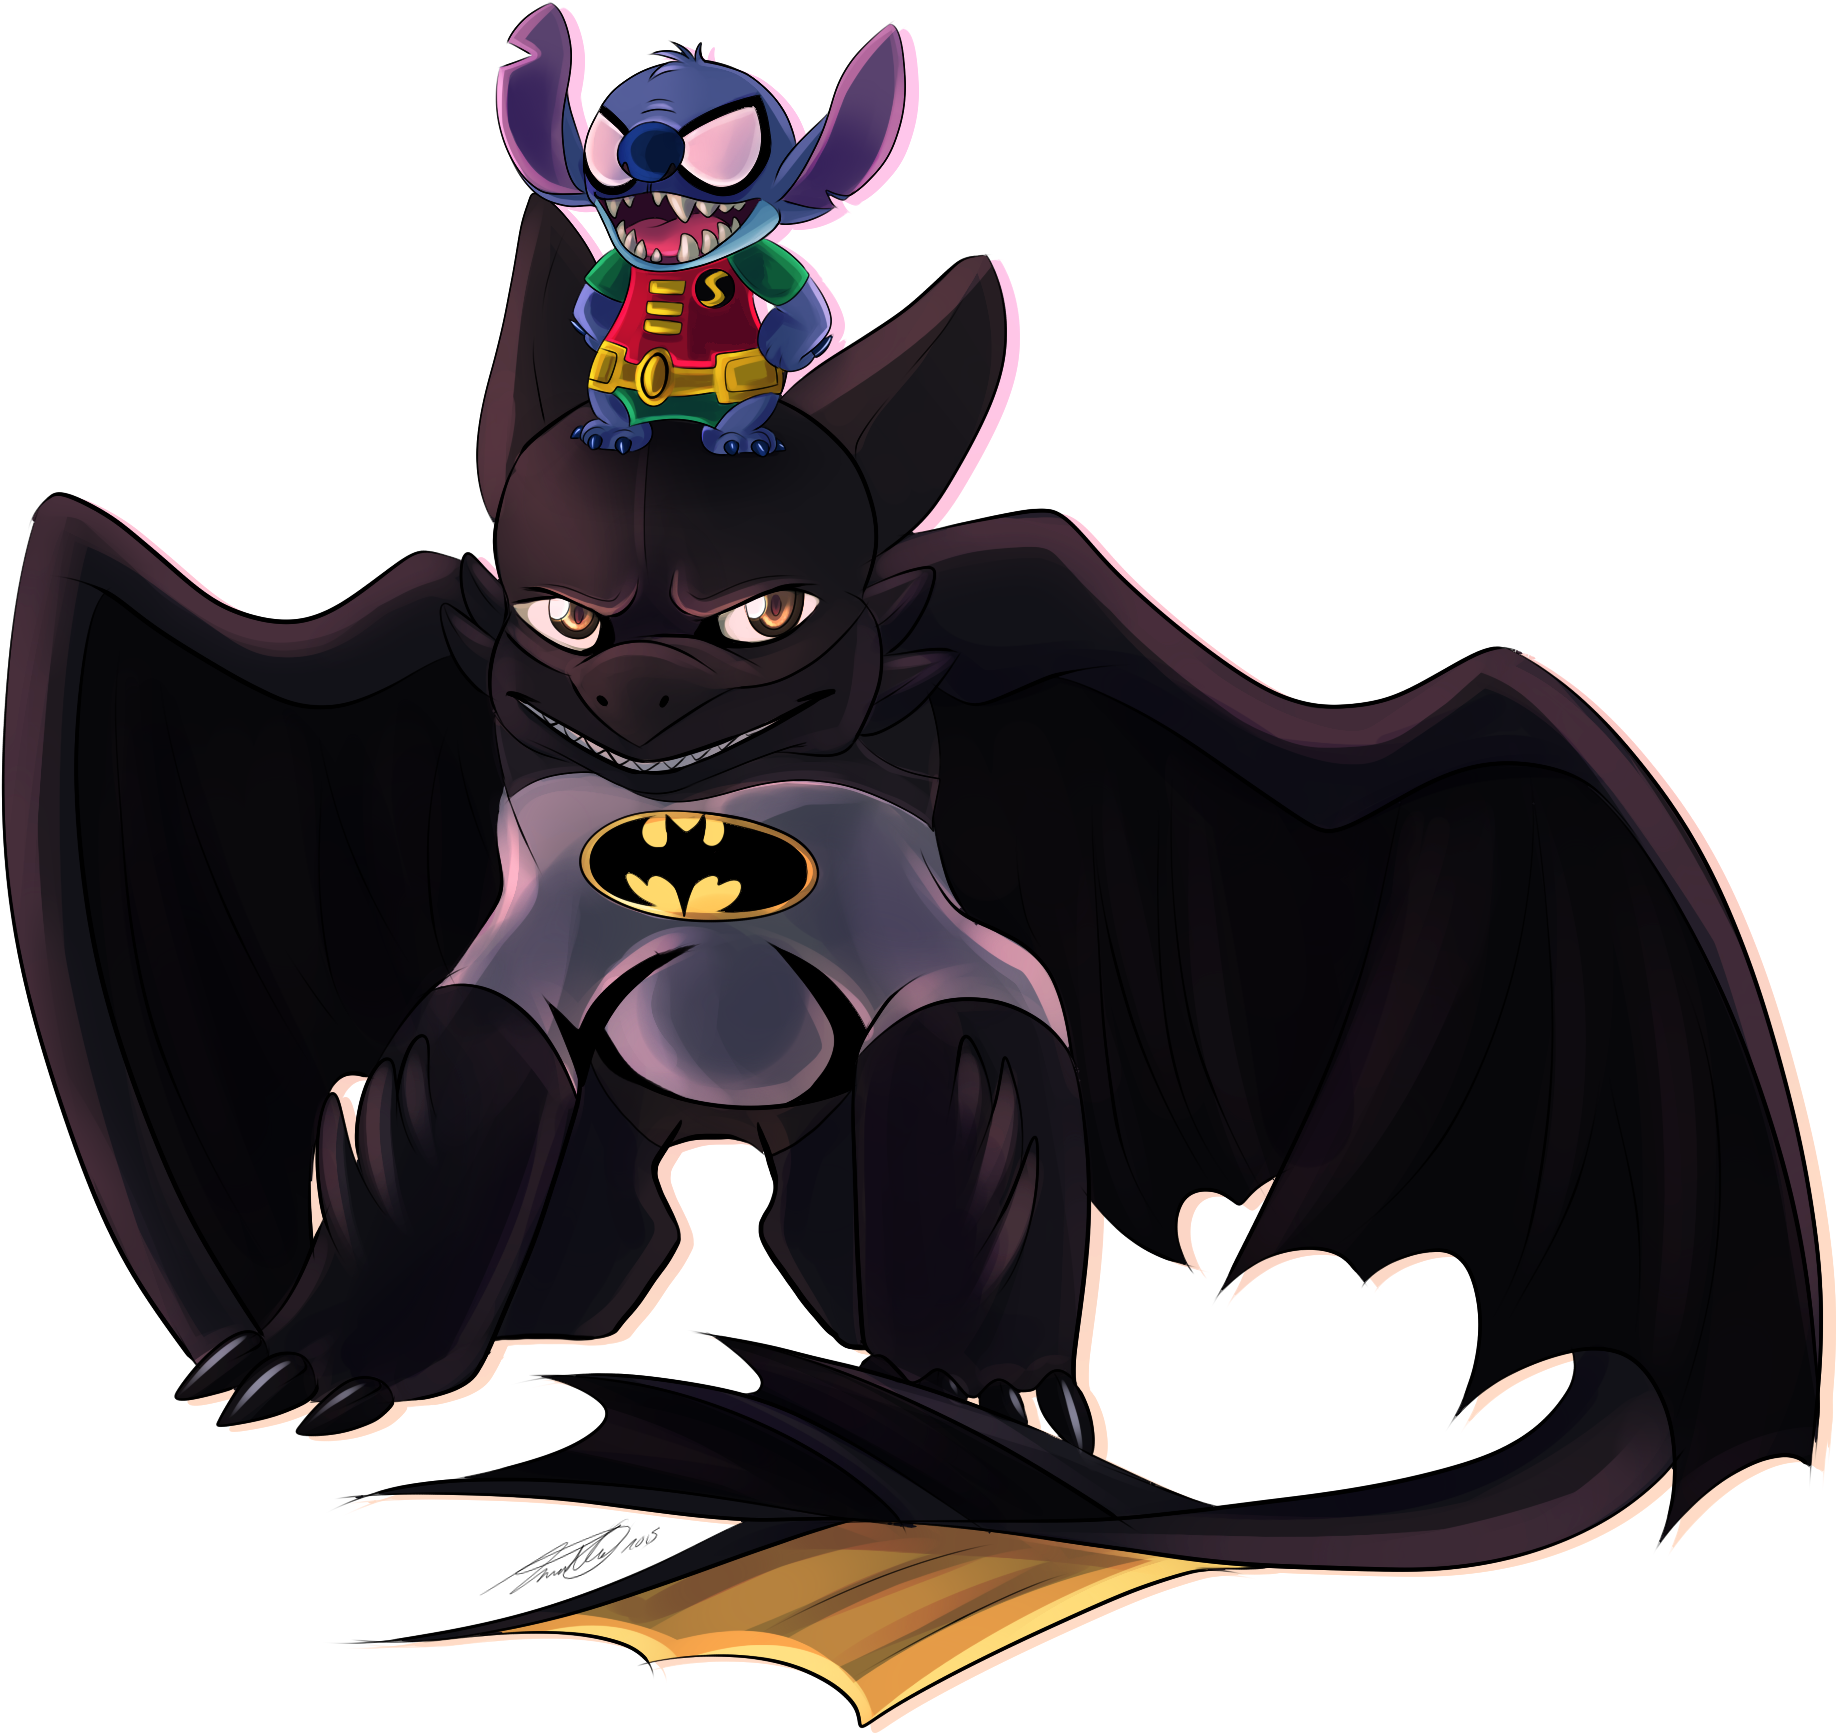 Stitch Batman Toothless Drawing How To Train Your Dragon - Stitch Batman Toothless Drawing How To Train Your Dragon (2994x2200)